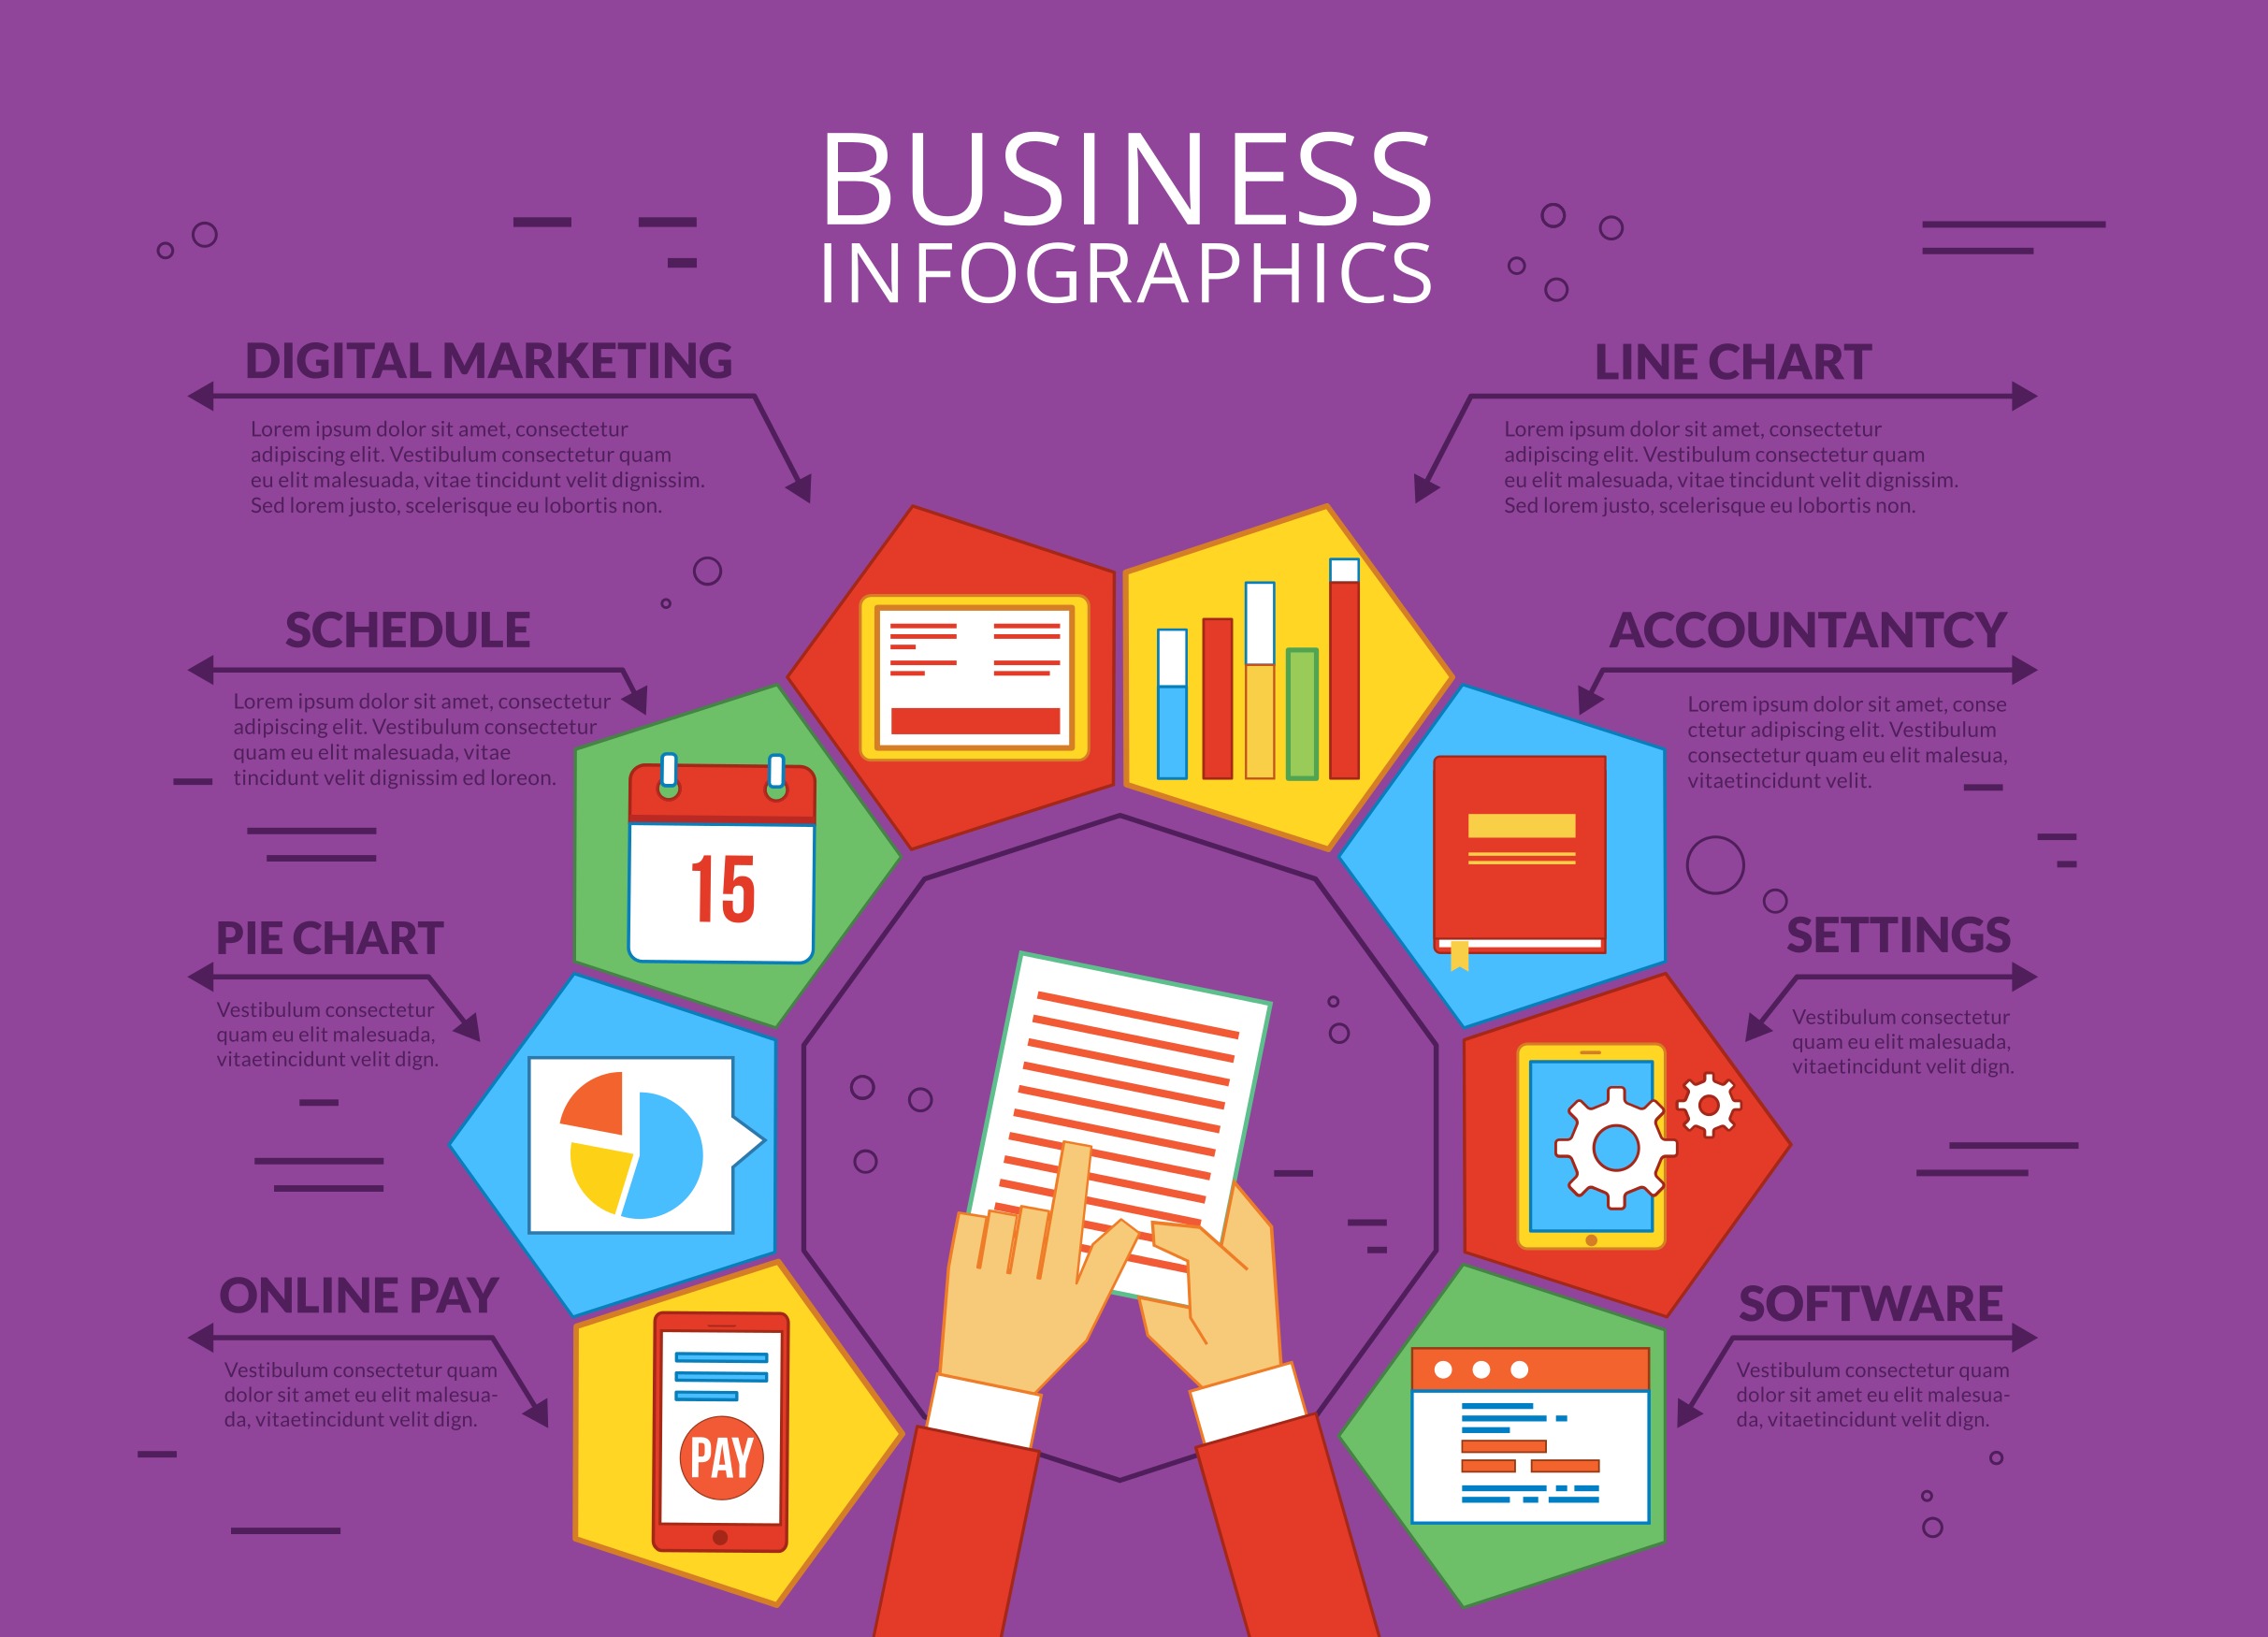 Business Infographic Concepts ~ Presentation Templates on Creative Market